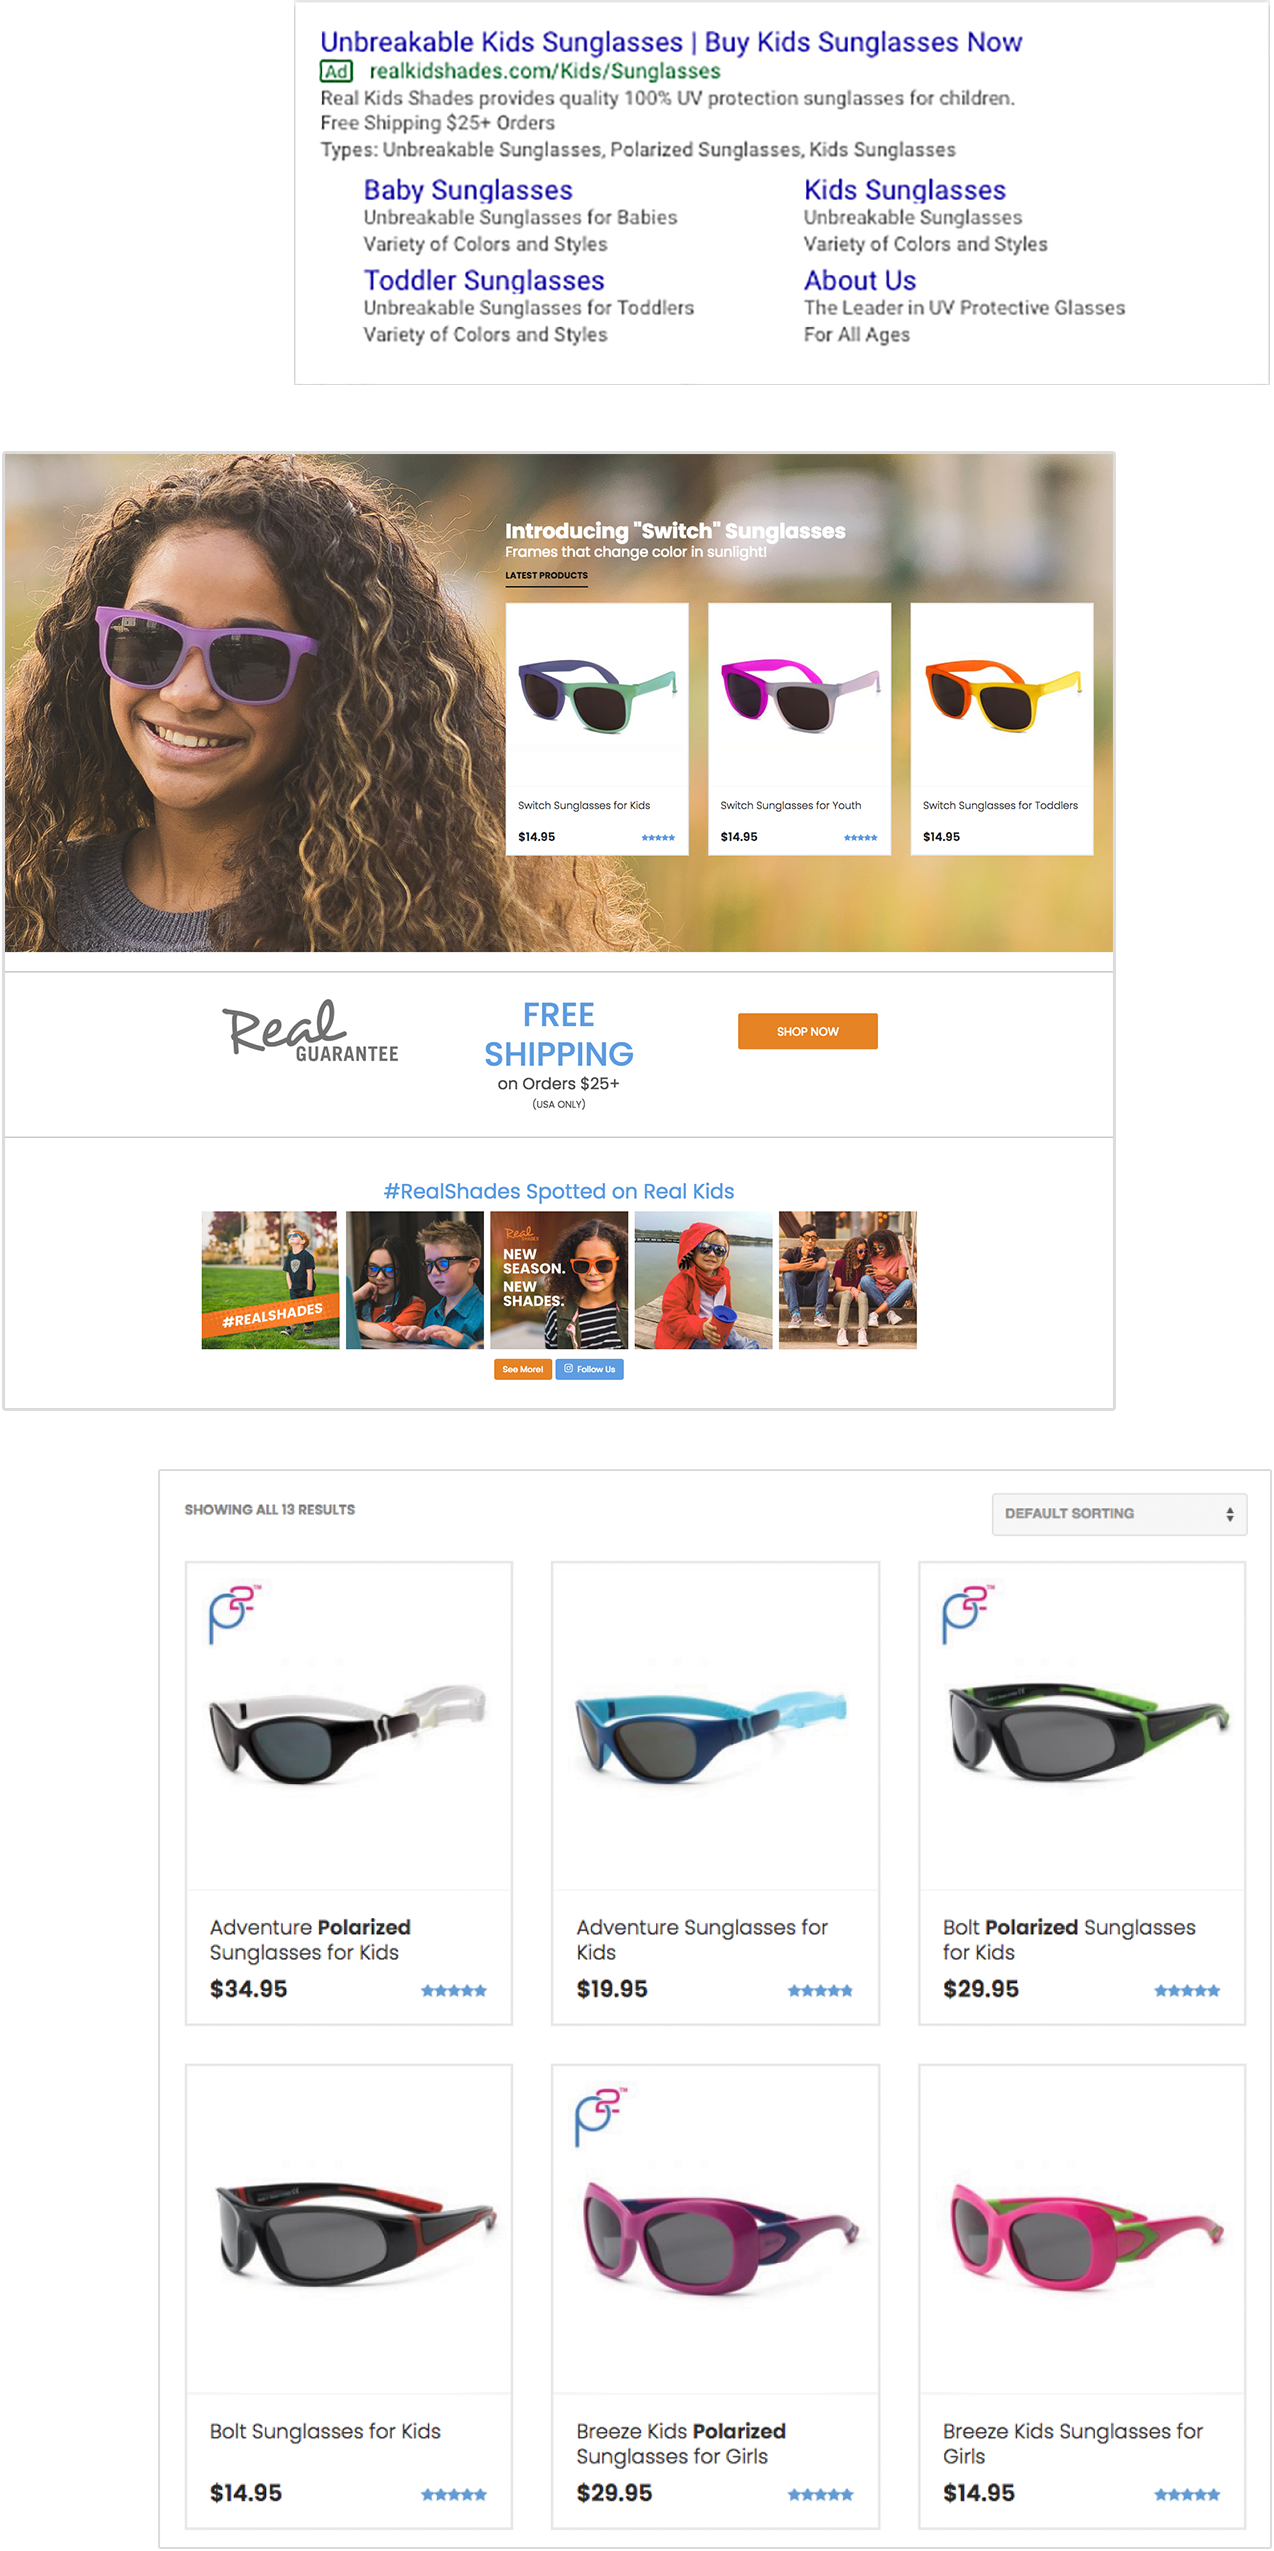 Screenshots of Real Kids Shades website and Google search ad